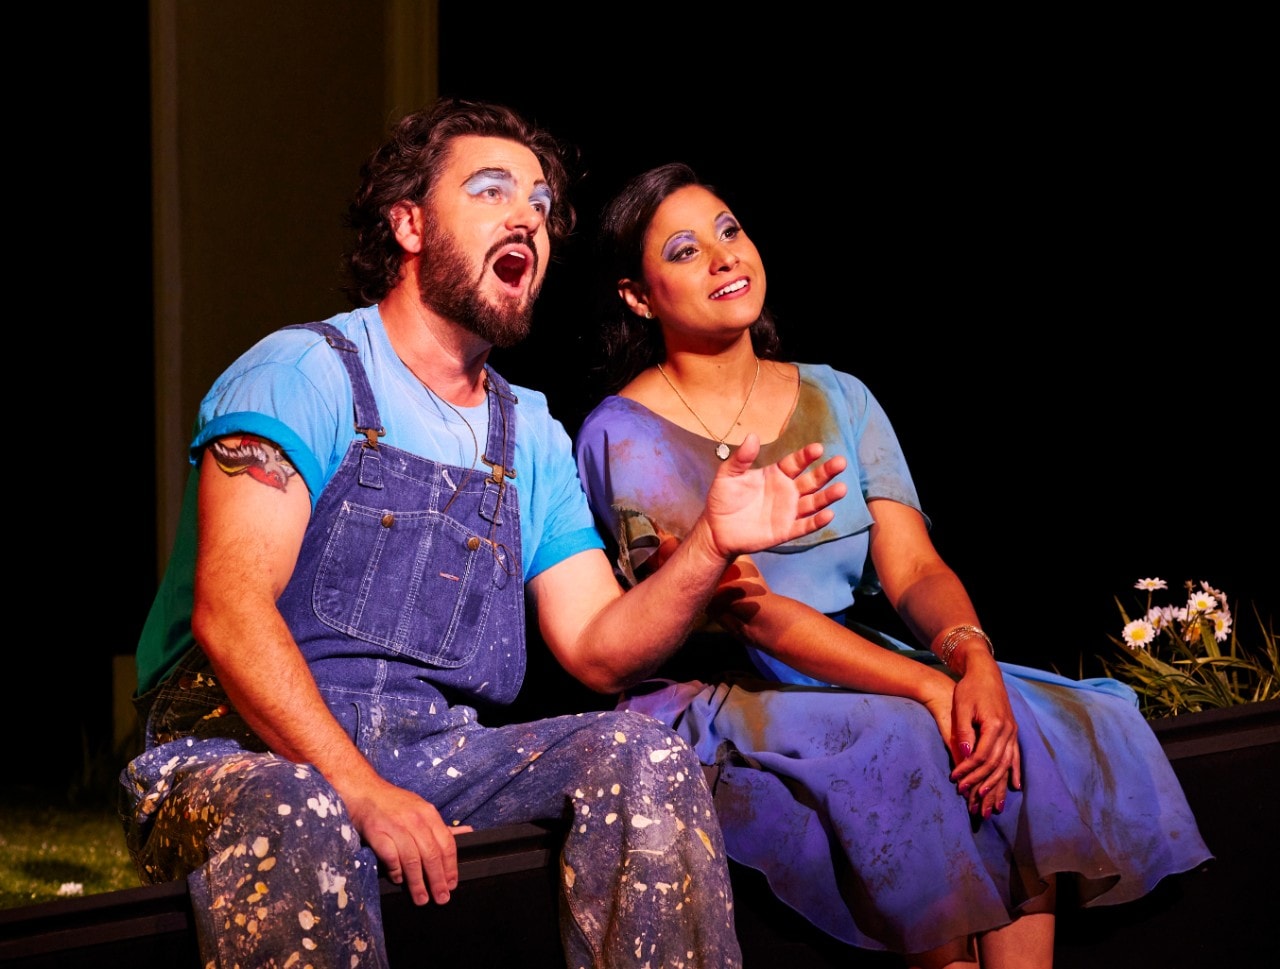 A man and a woman both wearing blue overalls sing to each other